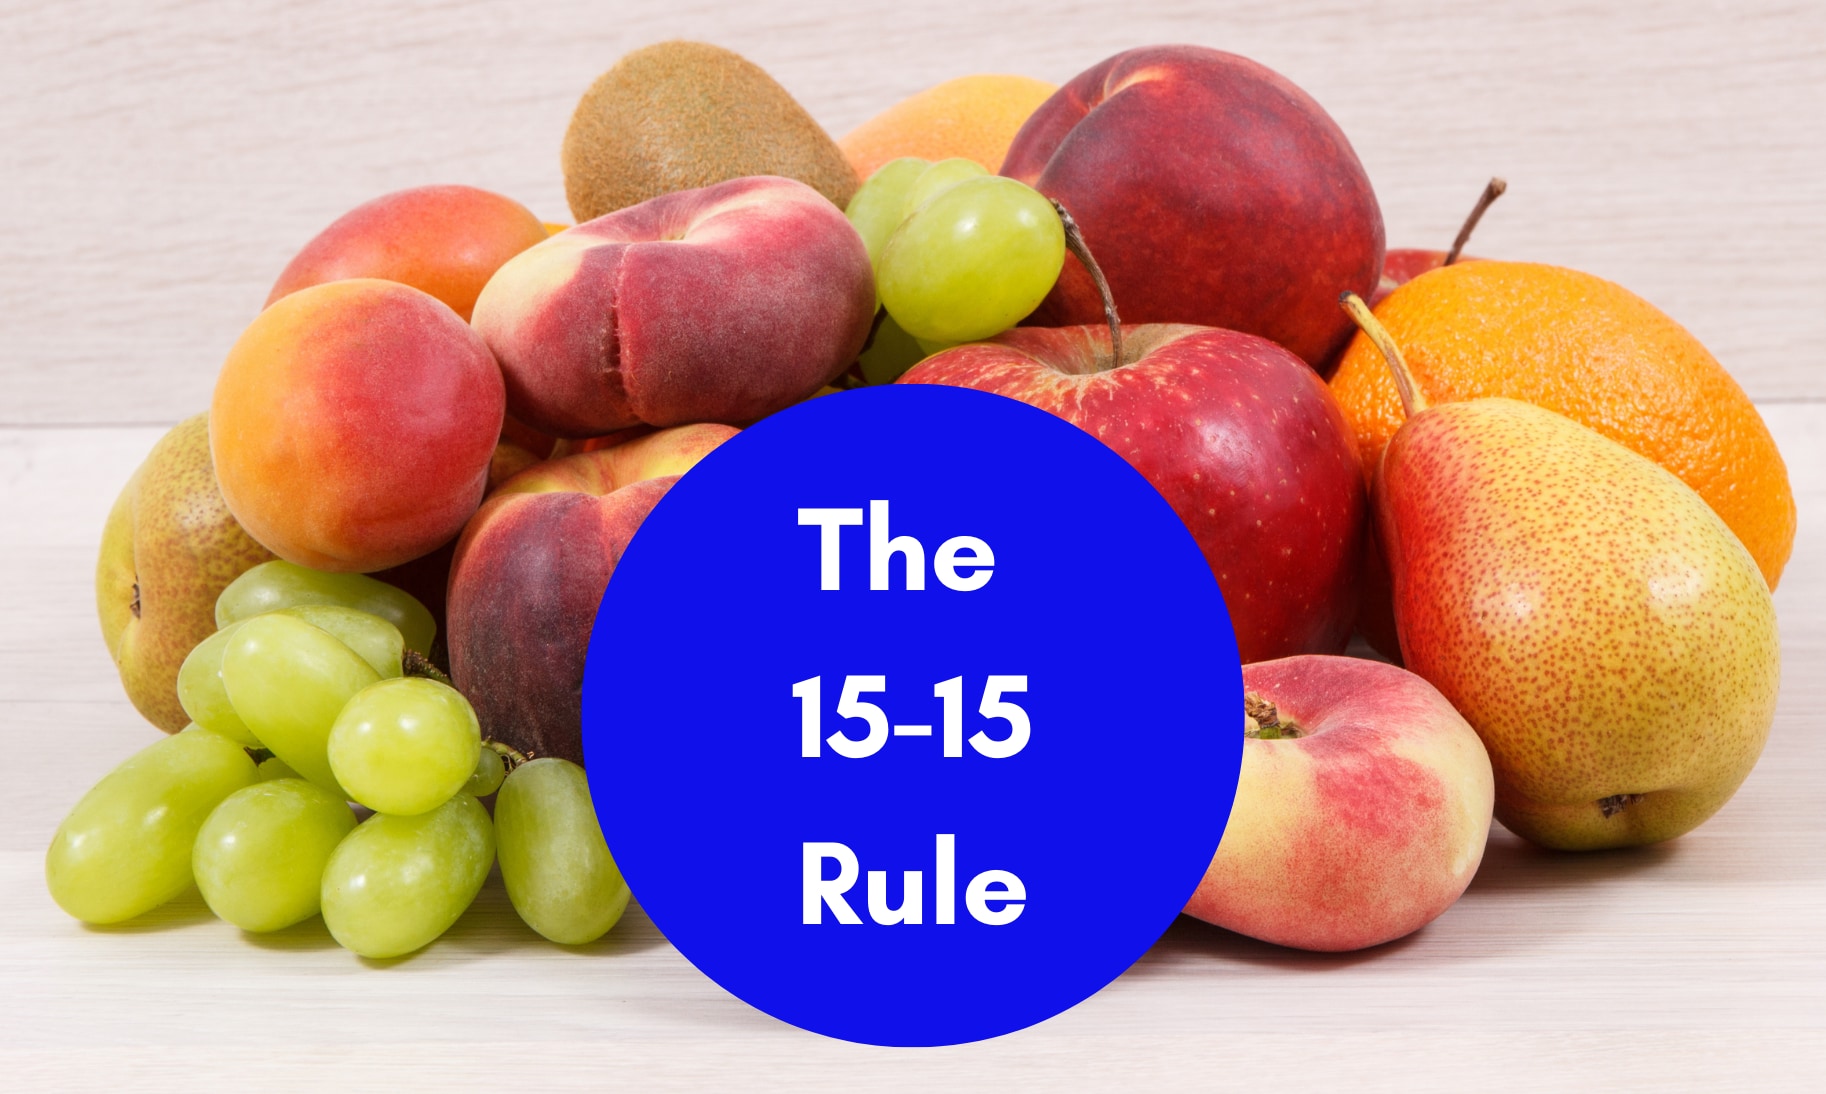 The 15-15 Rule